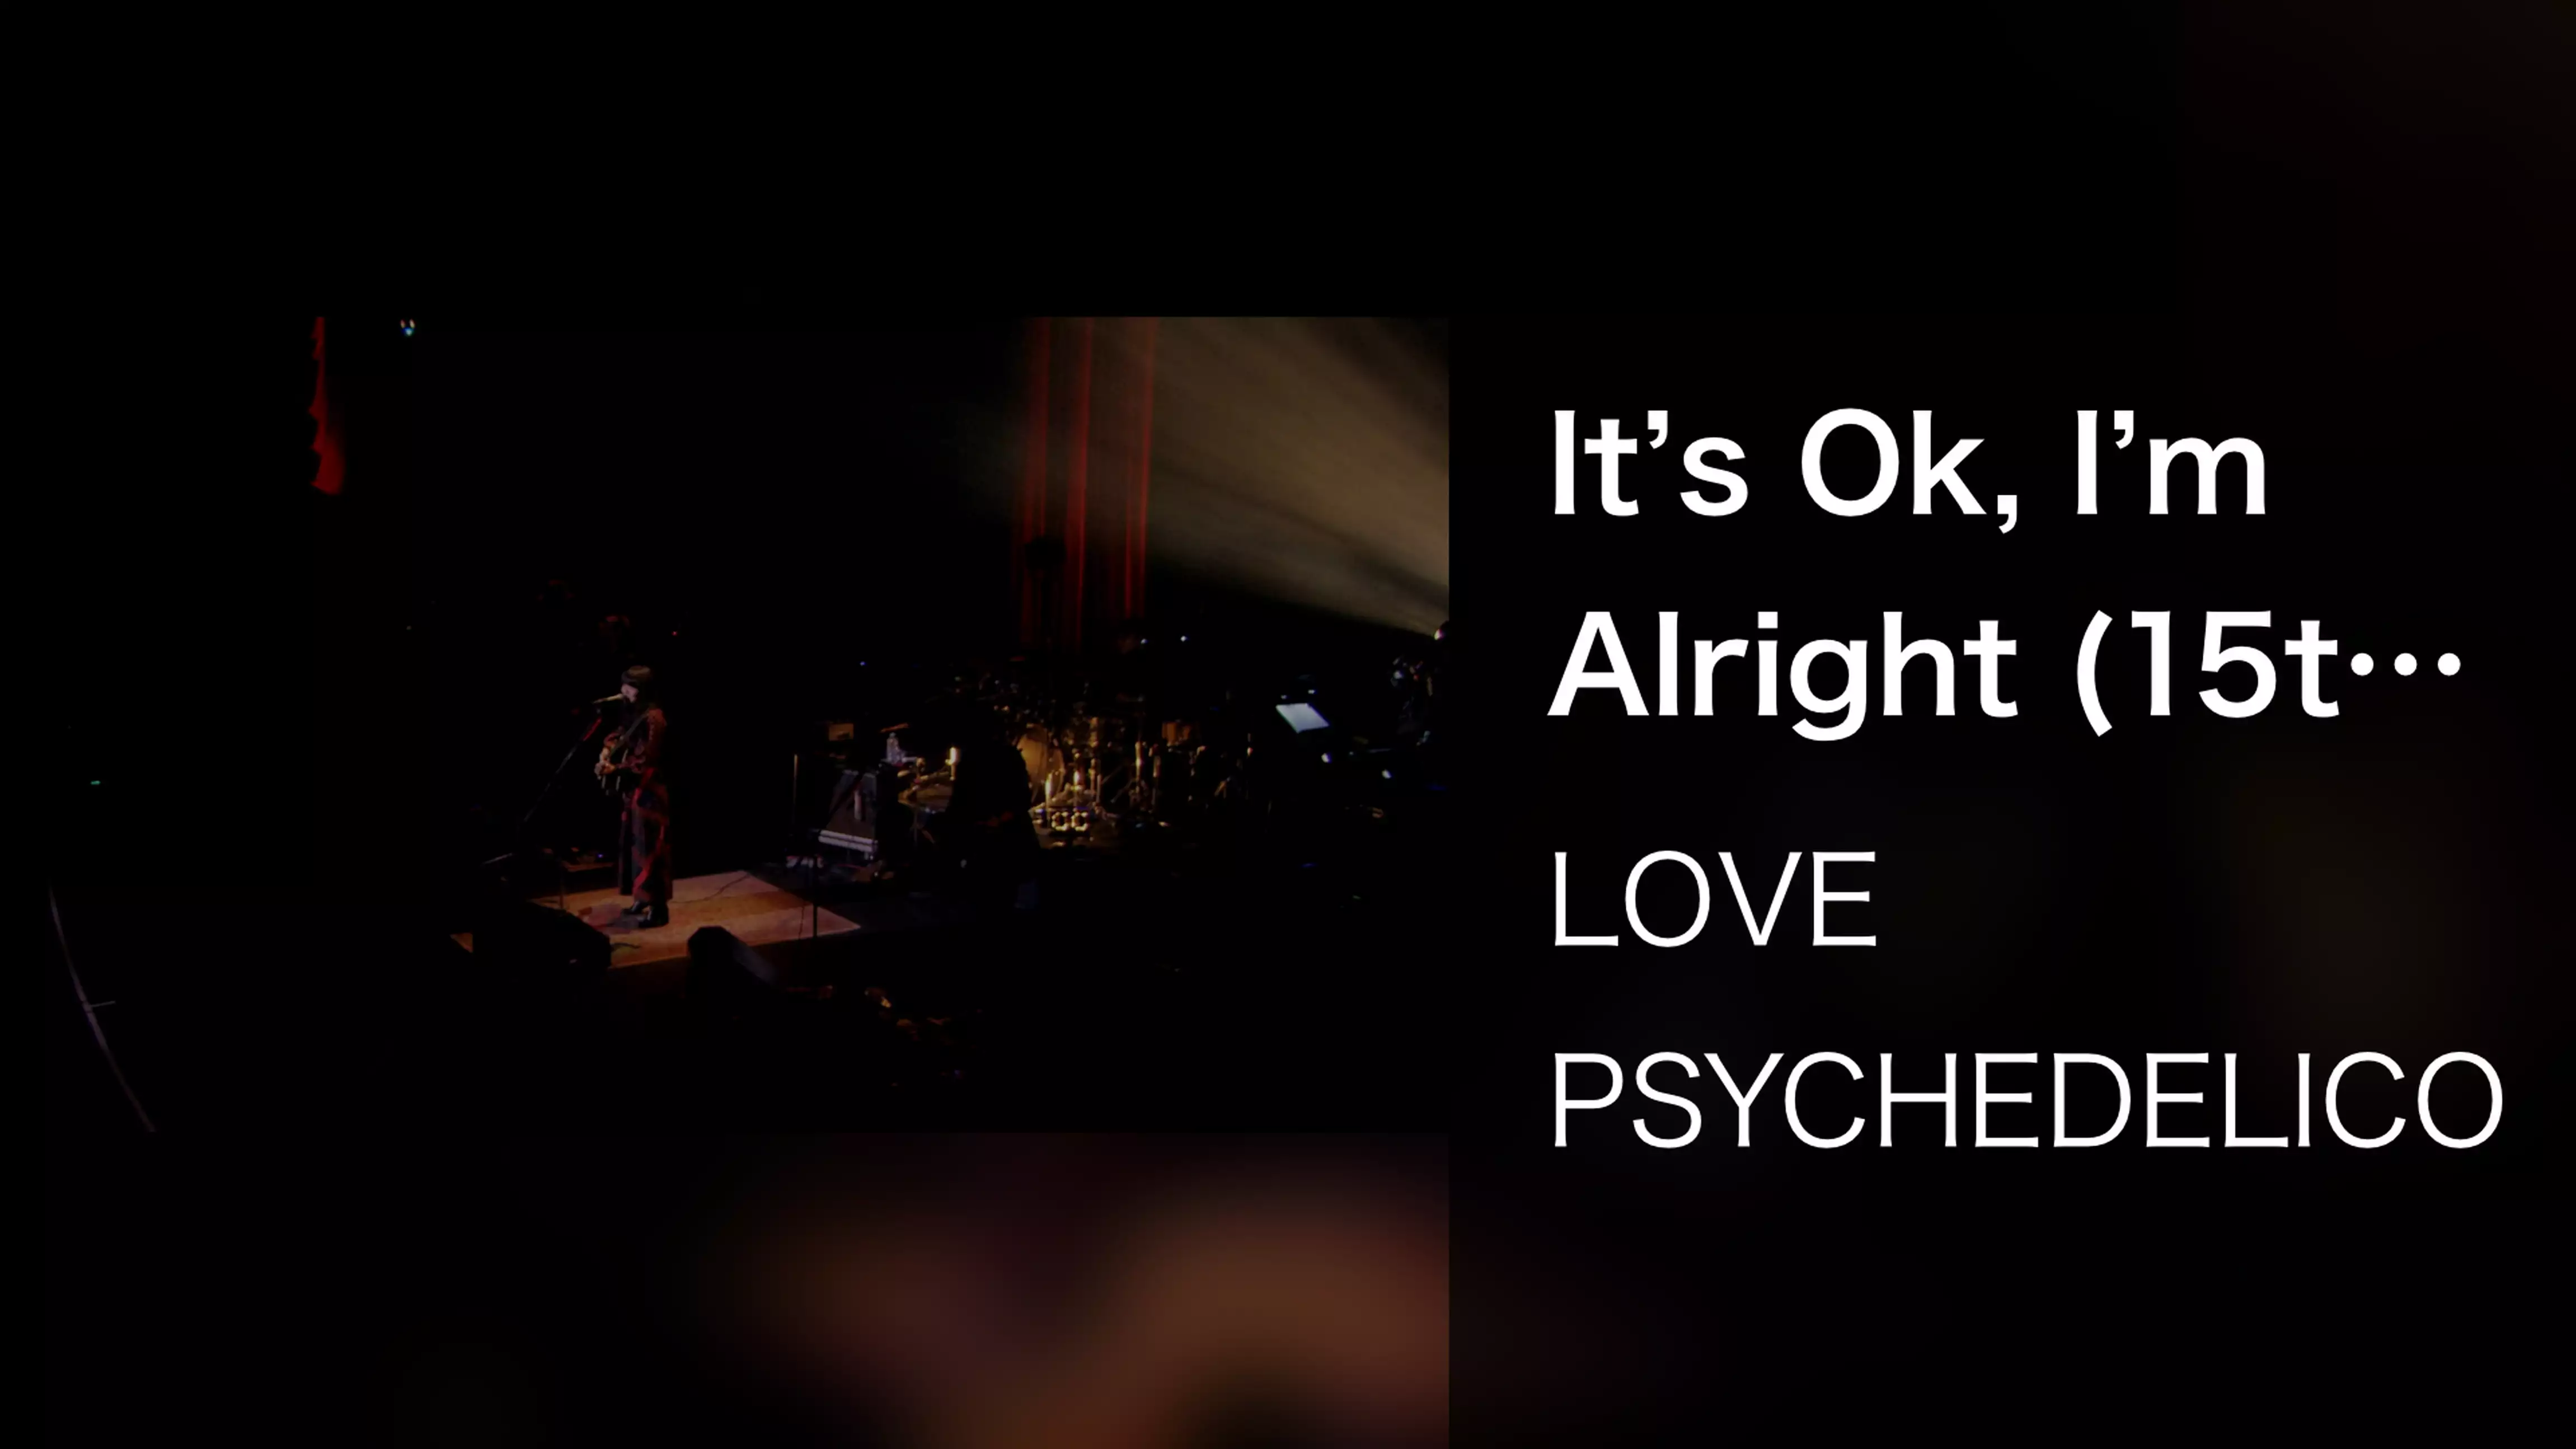 It's Ok, I'm Alright (15th ANNIVERSARY TOUR -THE BEST- Live at SHOWA WOMEN’S UNIVERSITY HITOMI MEMORIAL HALL May 30th, 2015)